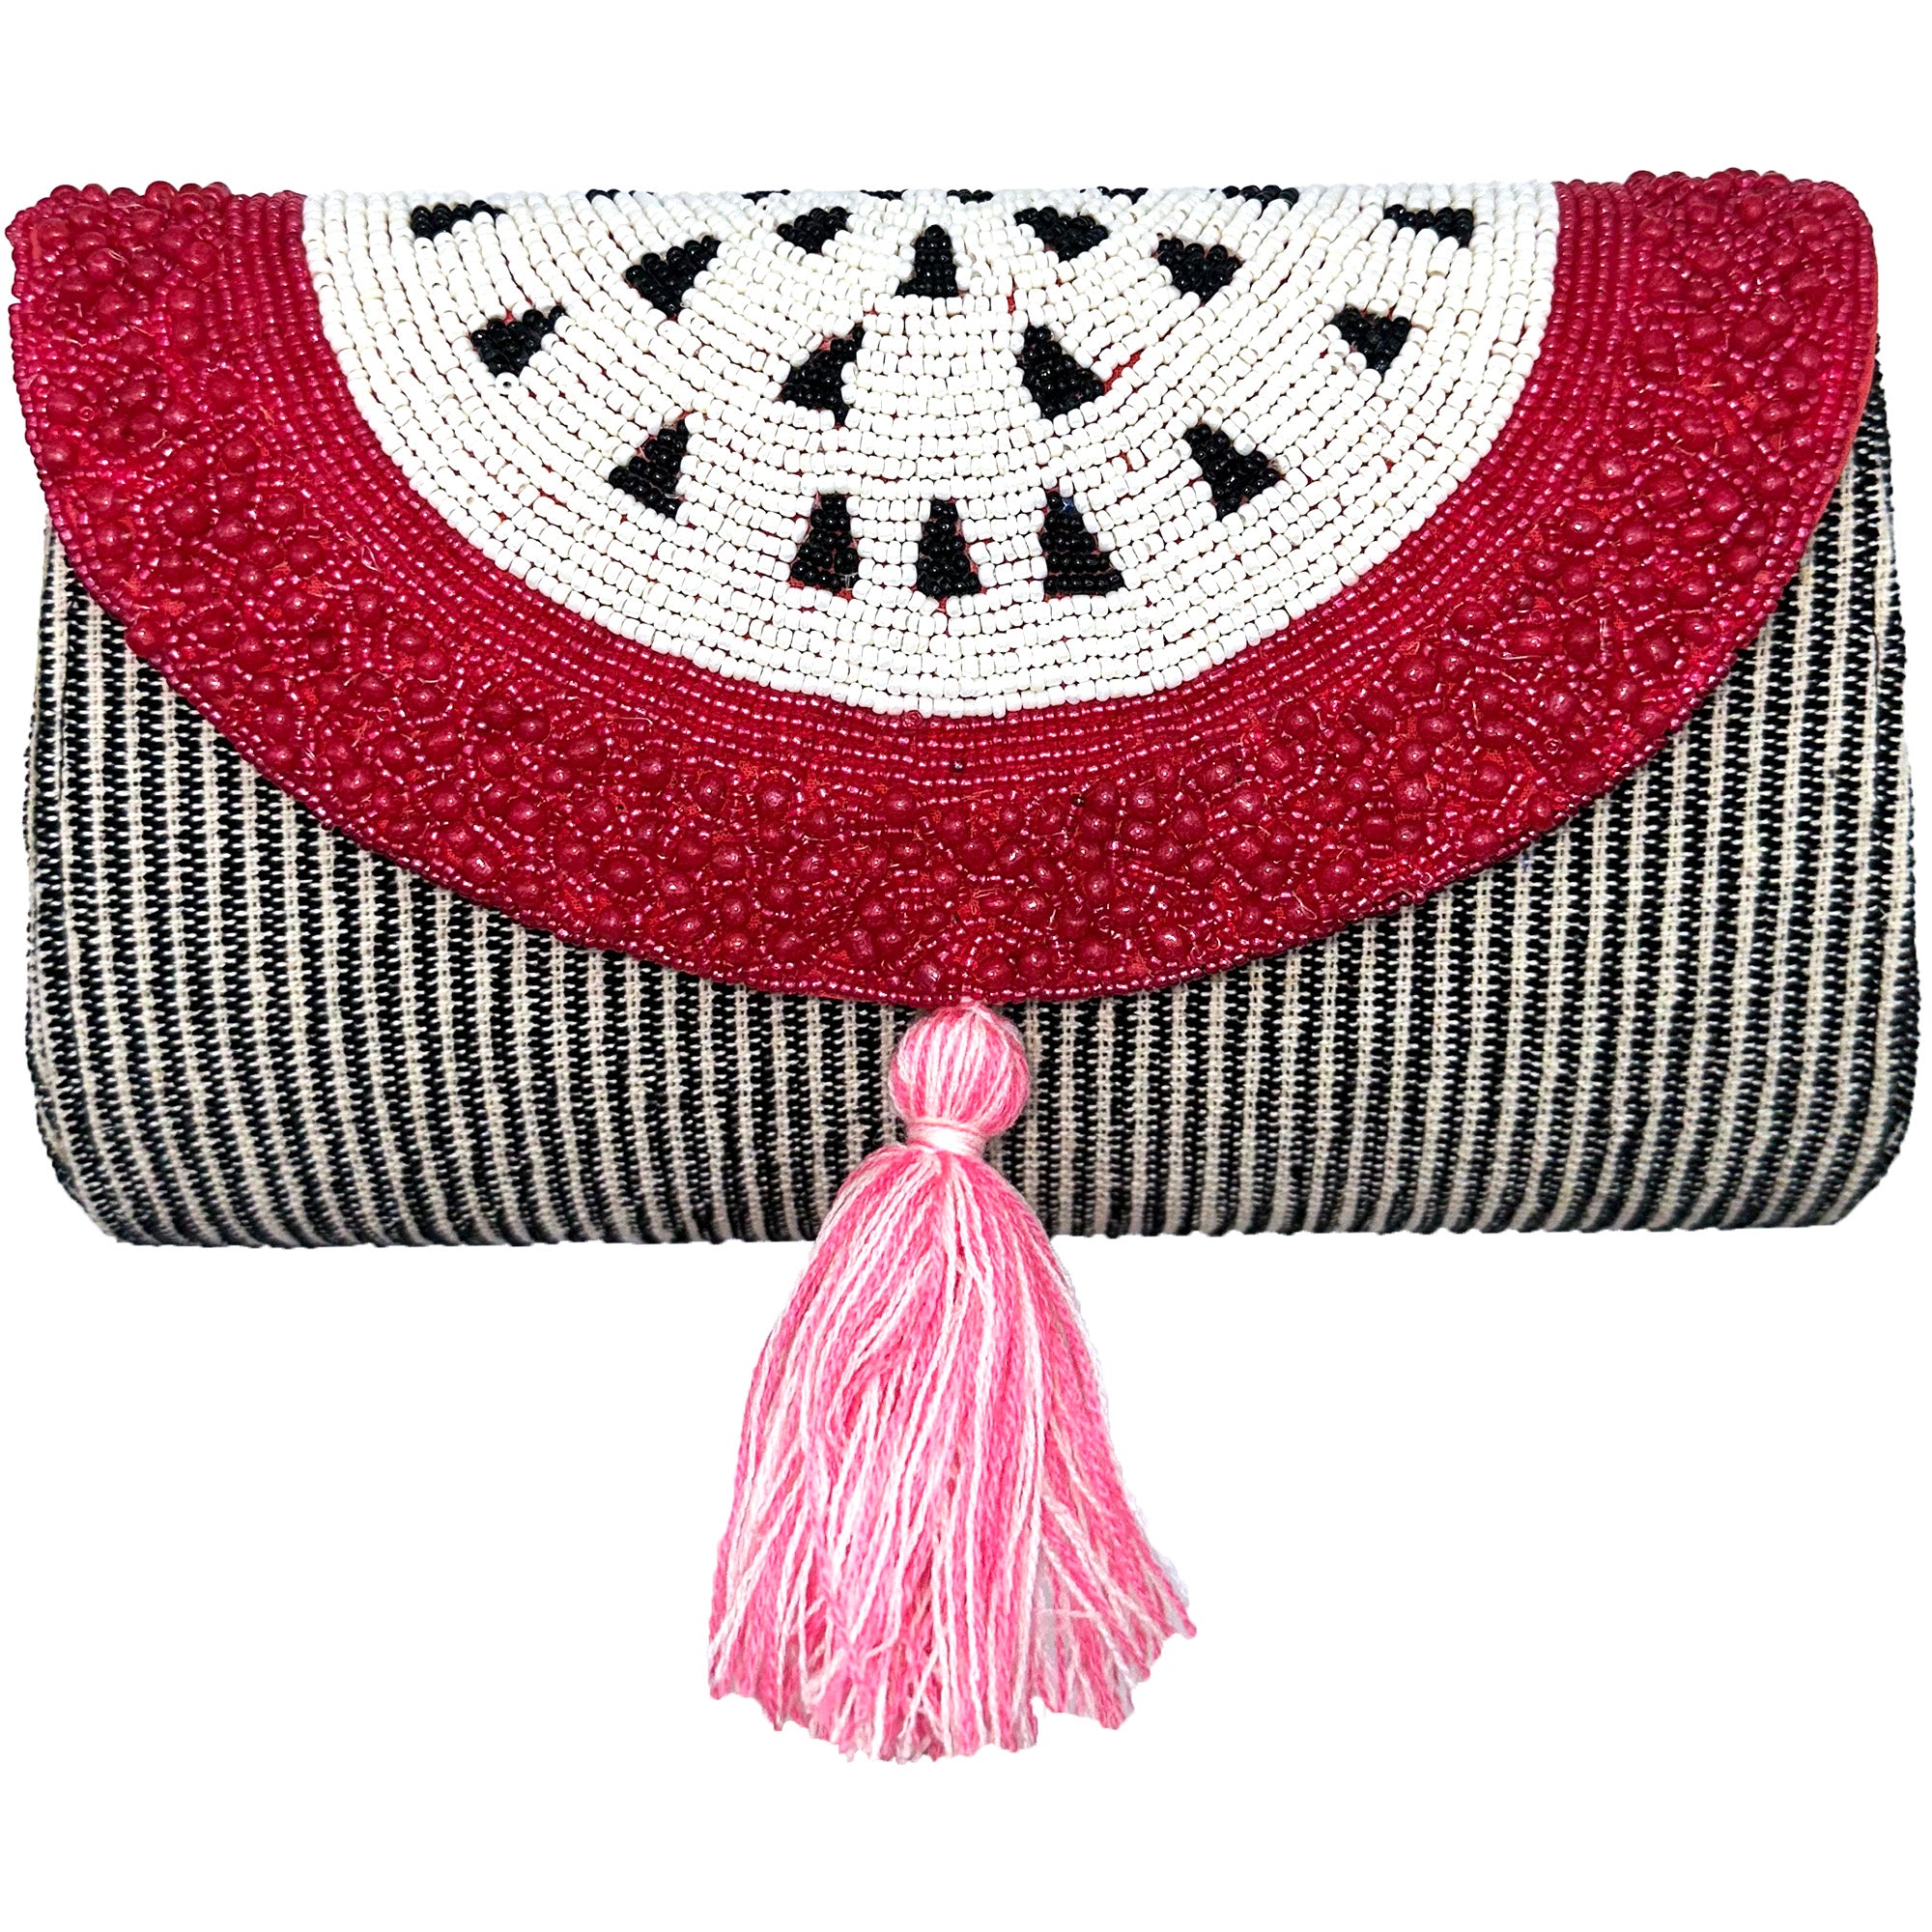 Passion Fruit Hardshell Glass Beaded Clutch